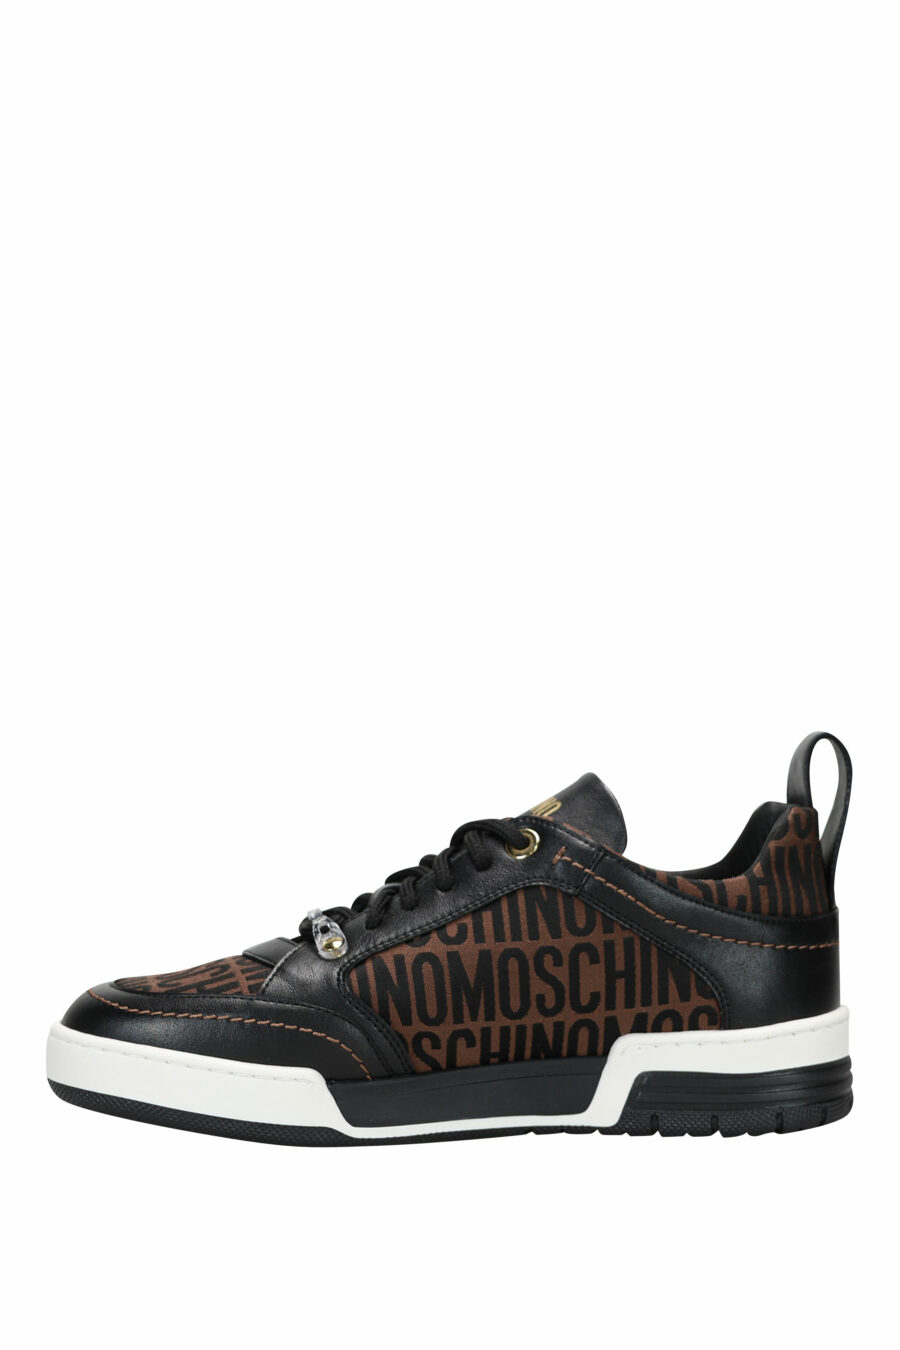 Brown and black leather trainers with "all over logo" and white sole - 8054653838109 2